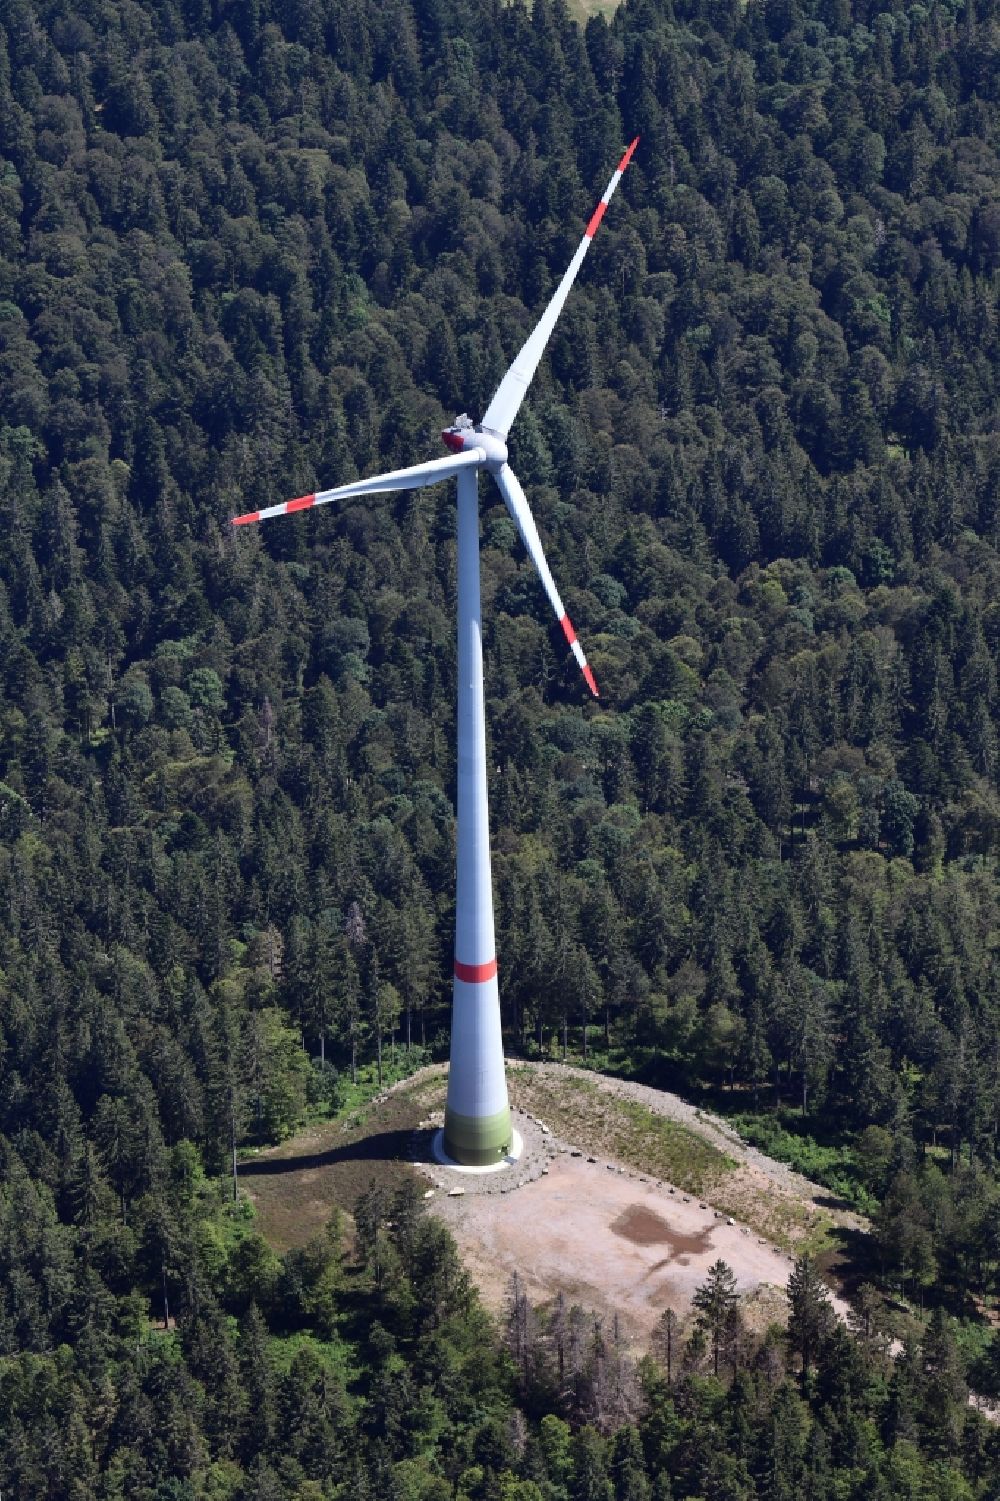 Aerial image Schopfheim - A wind turbine on the Rohrenkopf, the local mountain of Gersbach, a district of Schopfheim in Baden-Wuerttemberg. It was the first wind farm in the south of the Black Forest